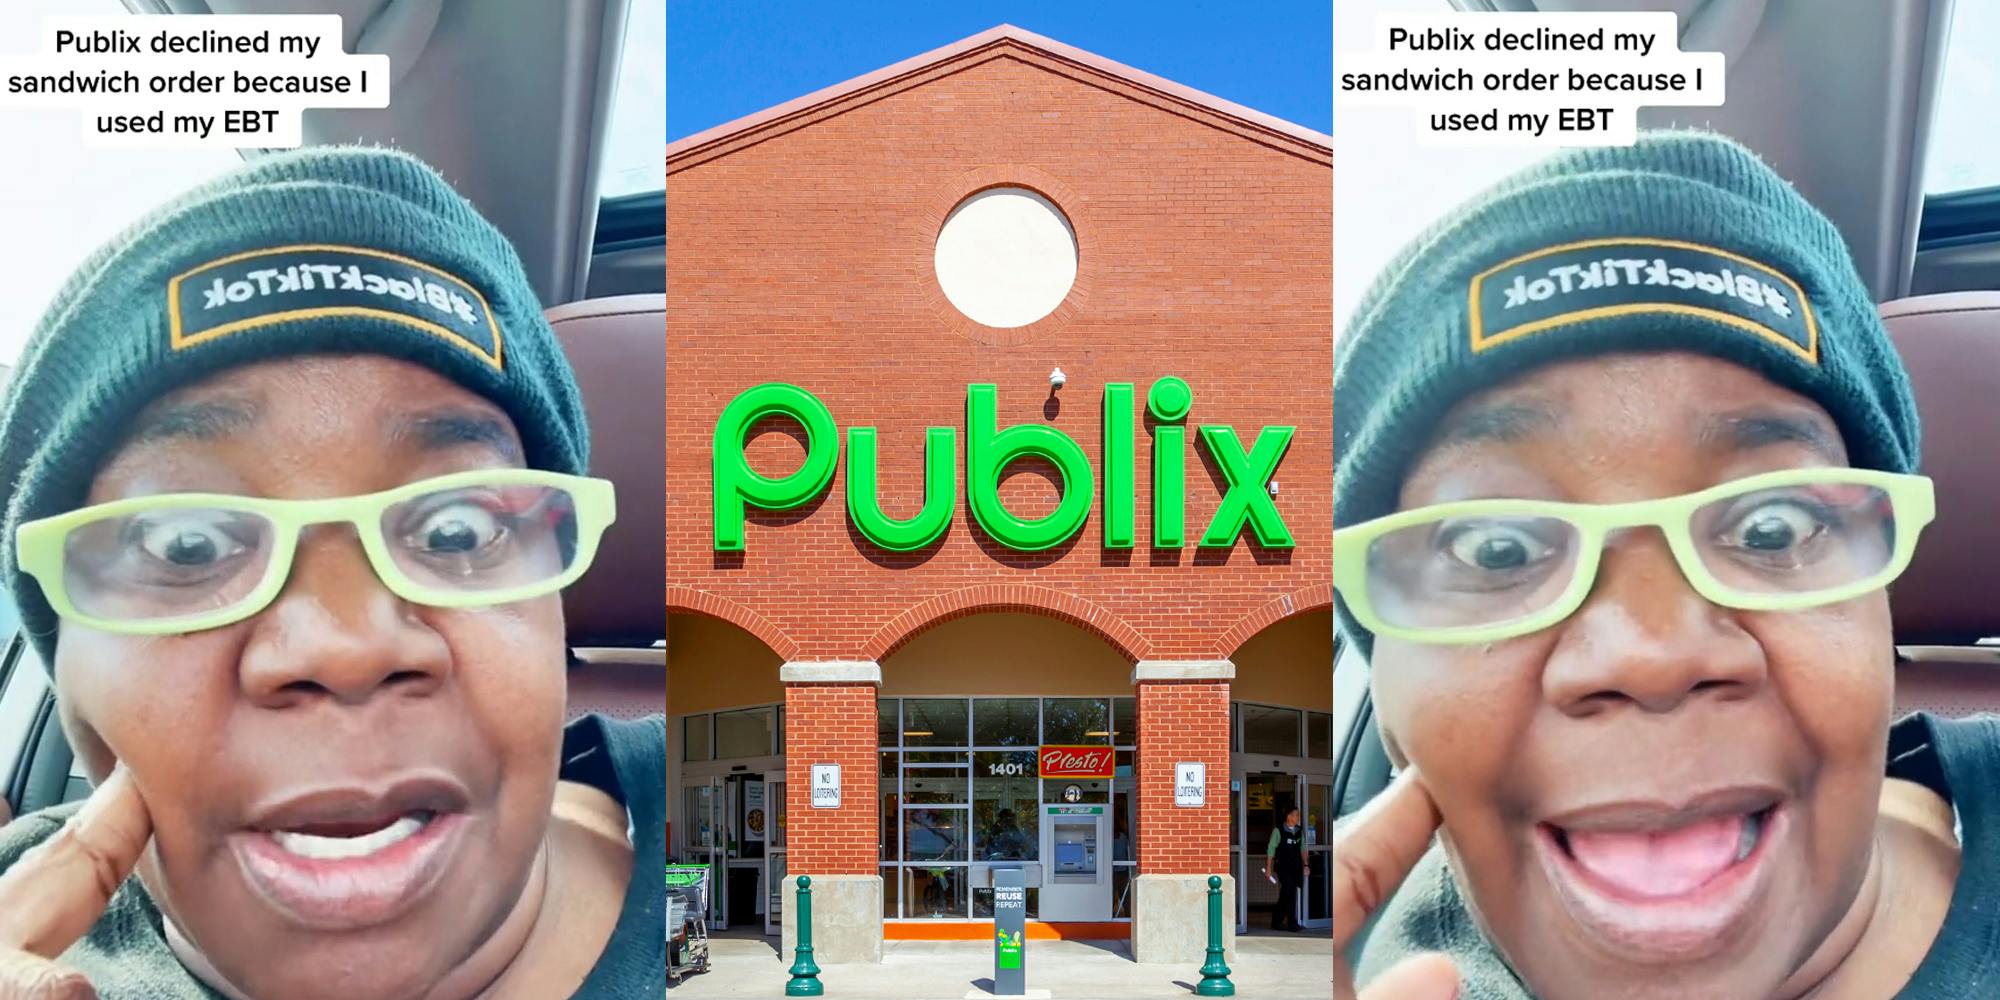 Woman Says Publix Denied Her Use of EBT for Sandwich